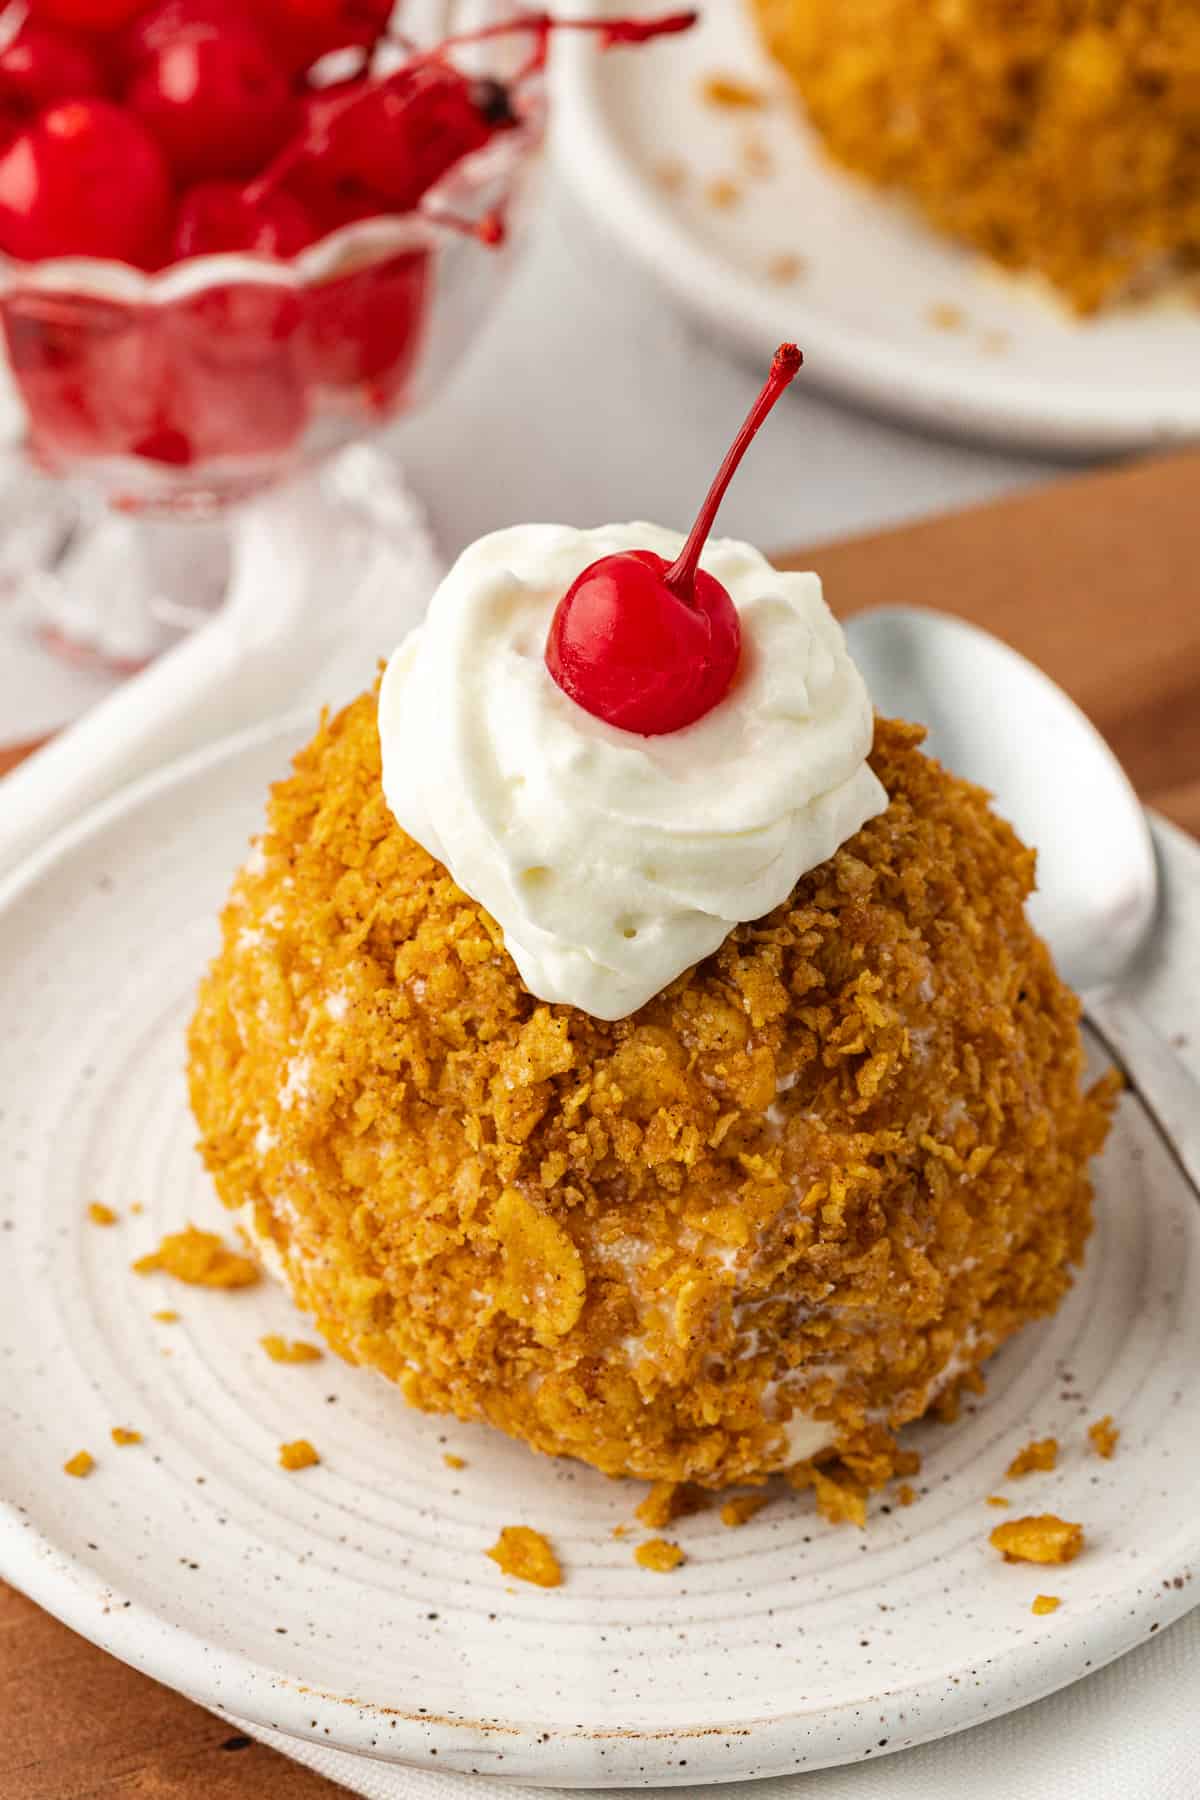 a ball of fried ice cream on a small plate with a spoon, topped with whipped cream and a cherry with a bowl of cherries and more fried ice cream in the background